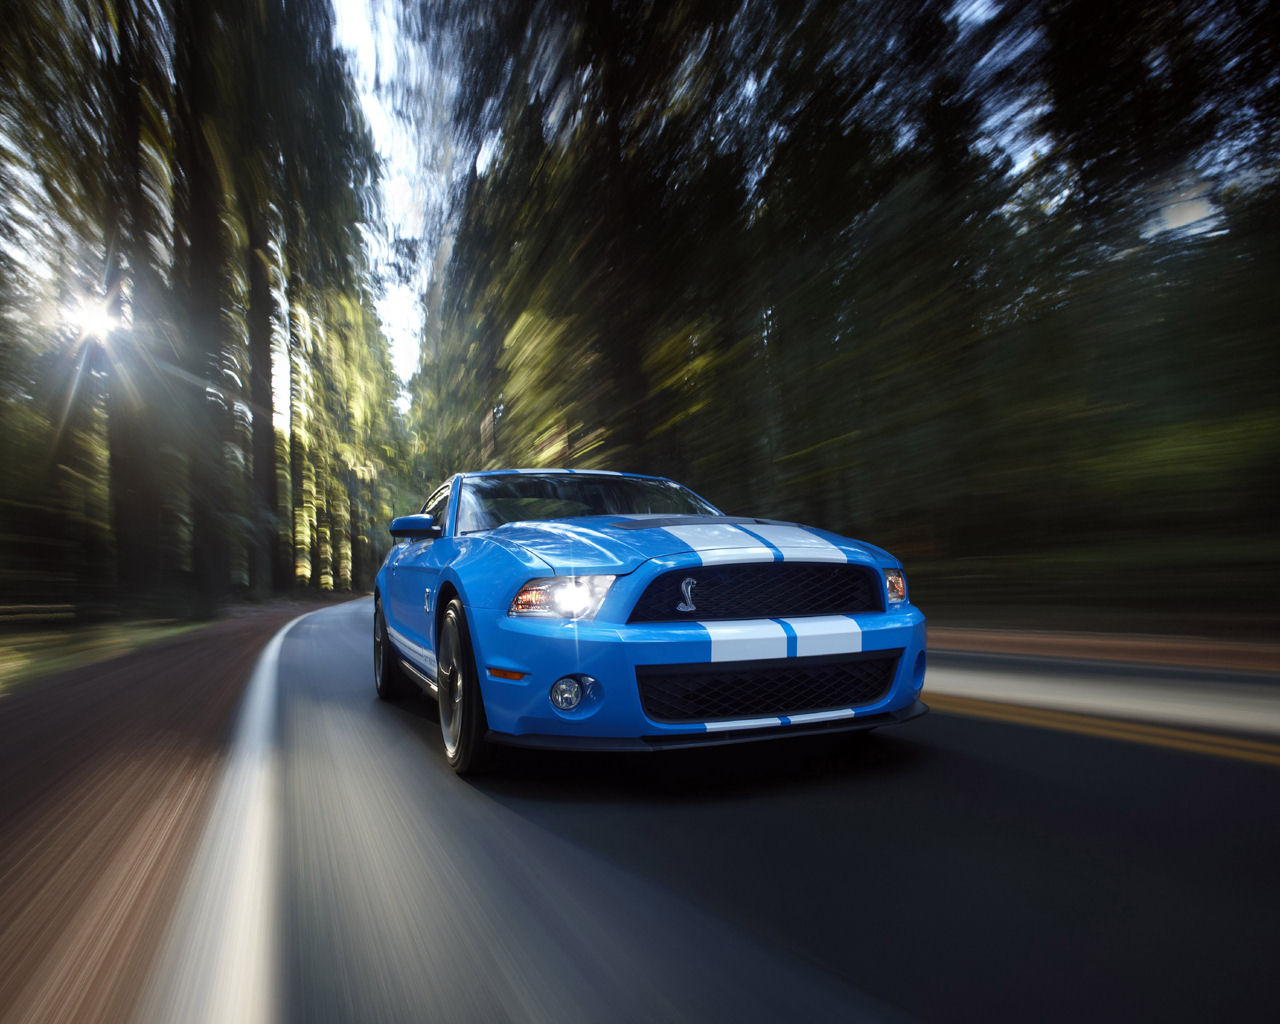 Ford Mustang Shelby Gt500 Convertible